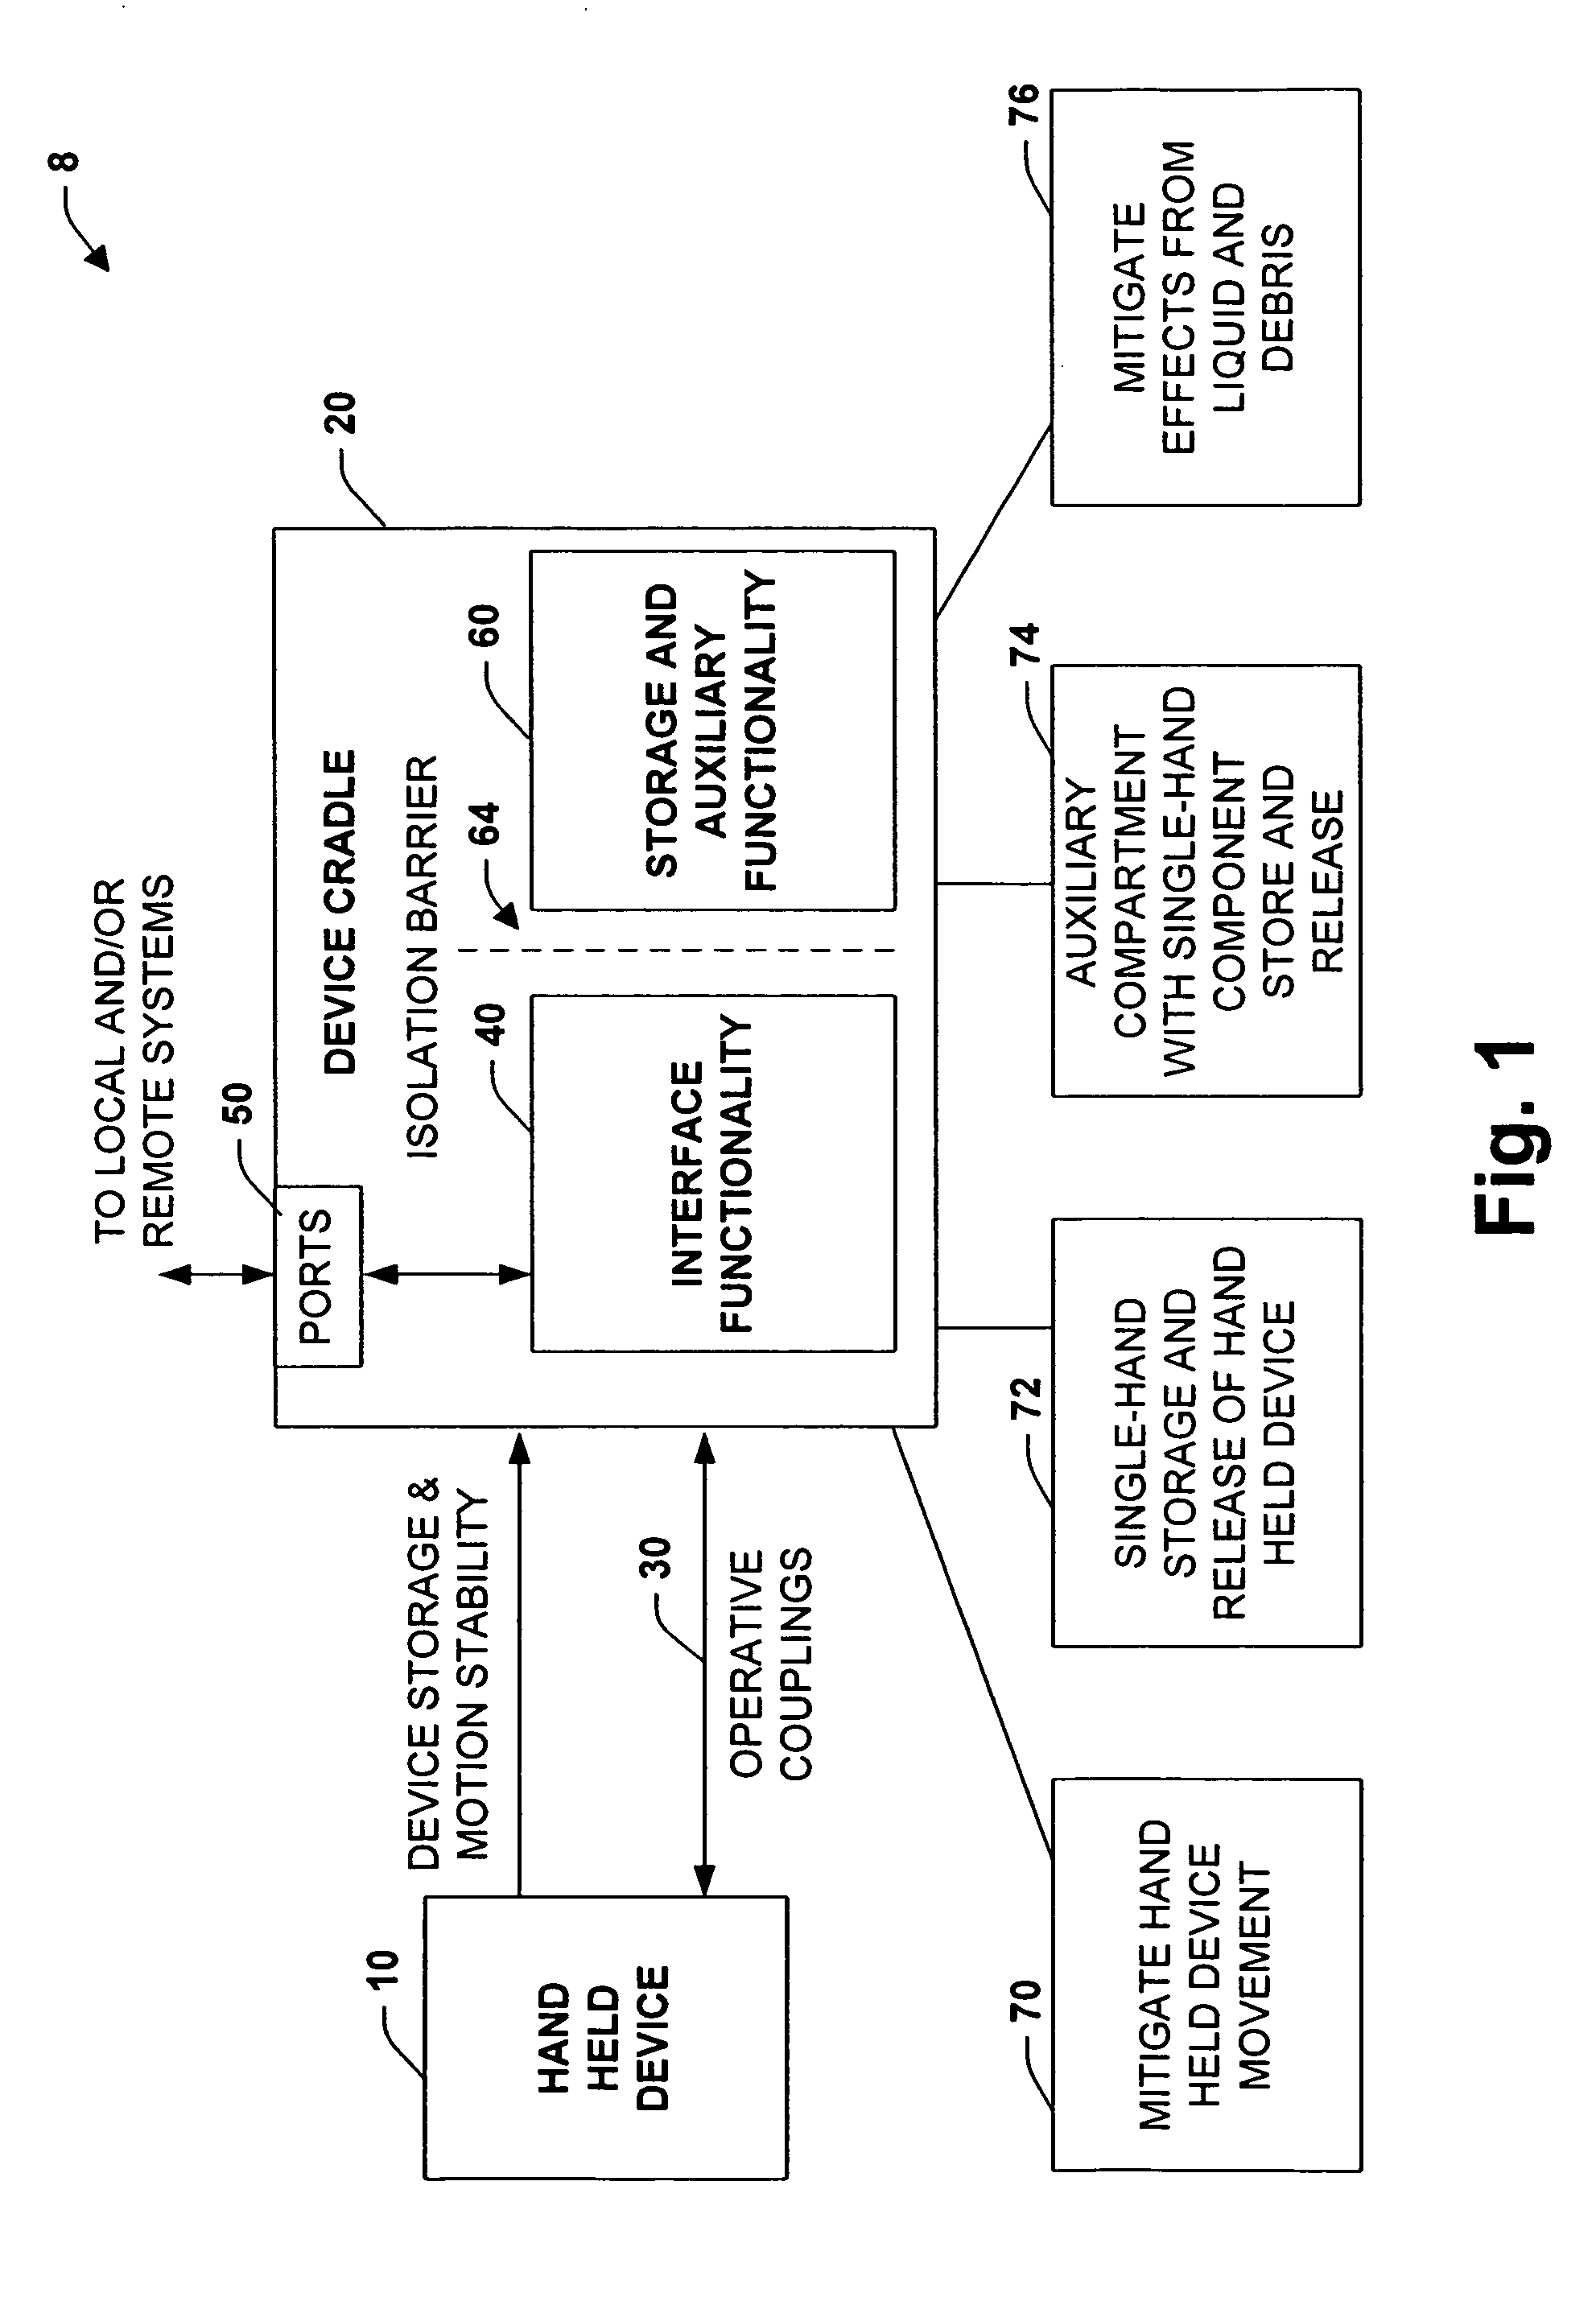 Vehicle cradle system and methodology for hand held devices